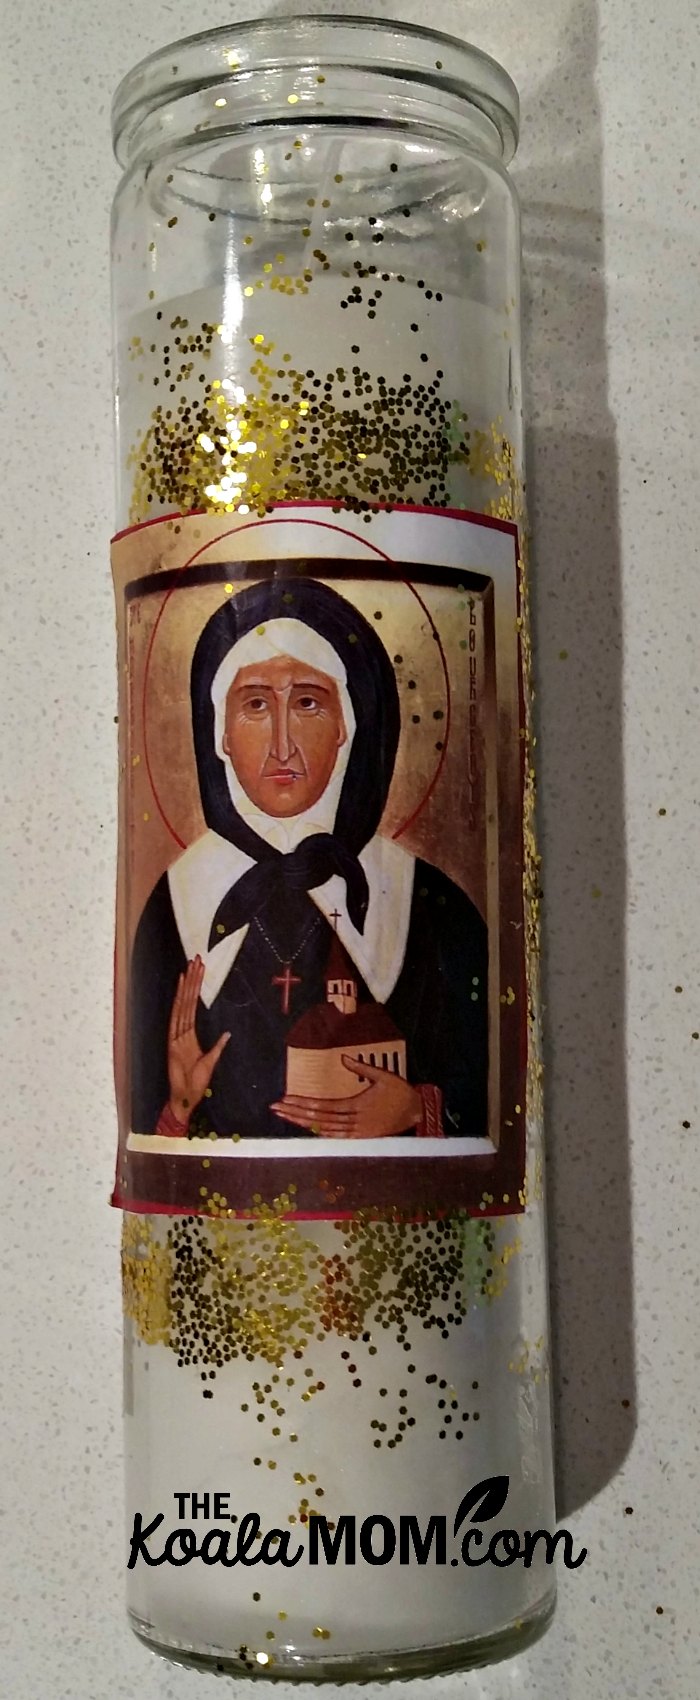 St. Marguerite Bourgeoys image on a candle.